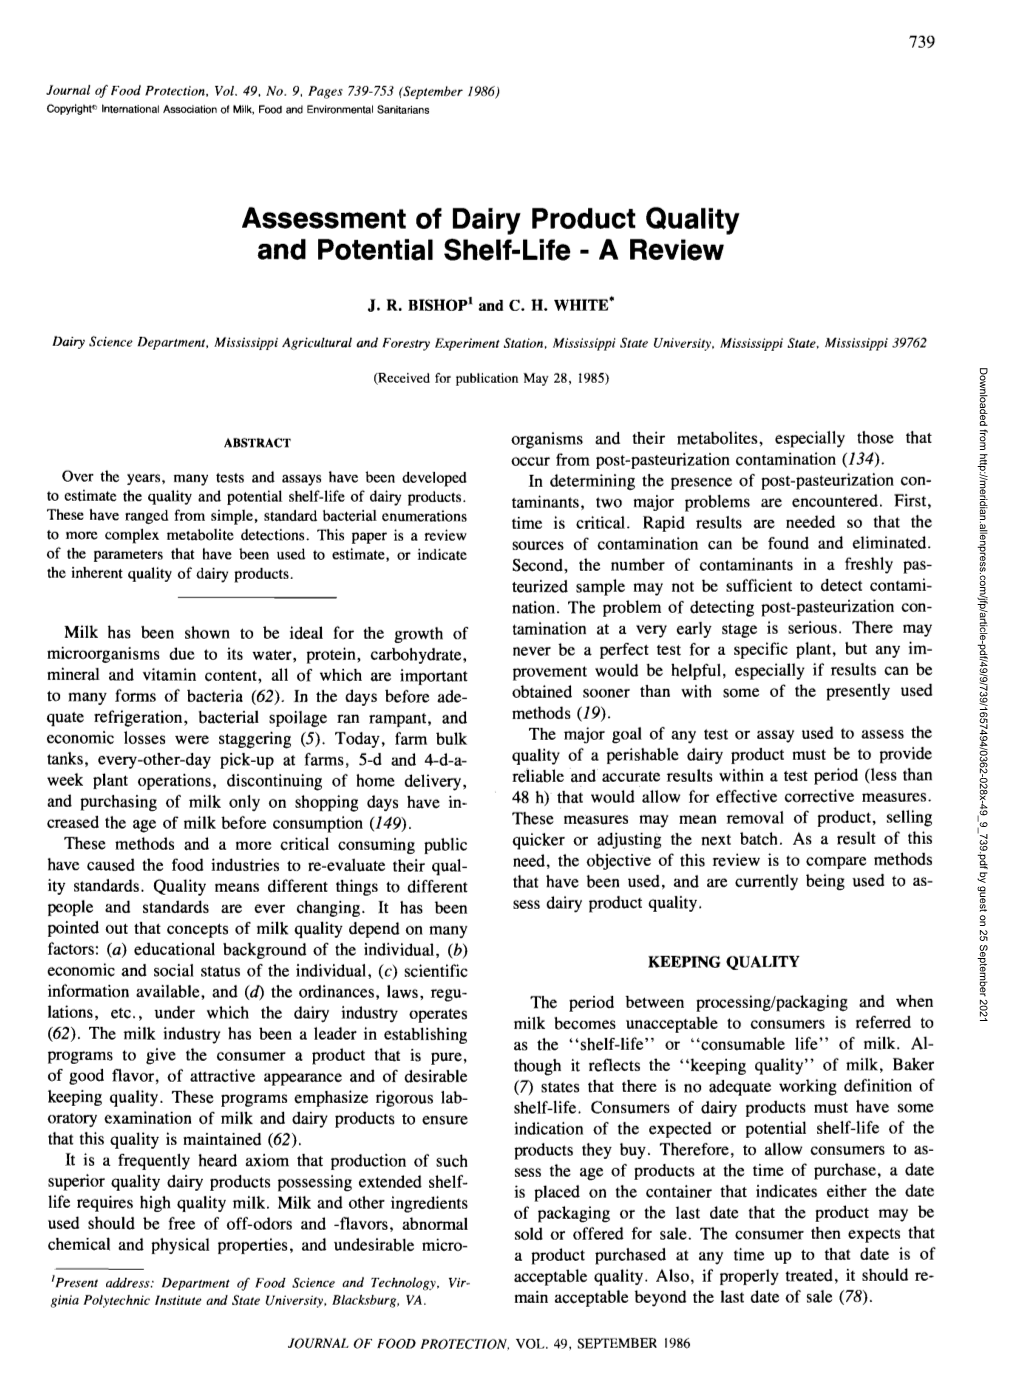 Assessment of Dairy Product Quality and Potential Shelf-Life - a Review